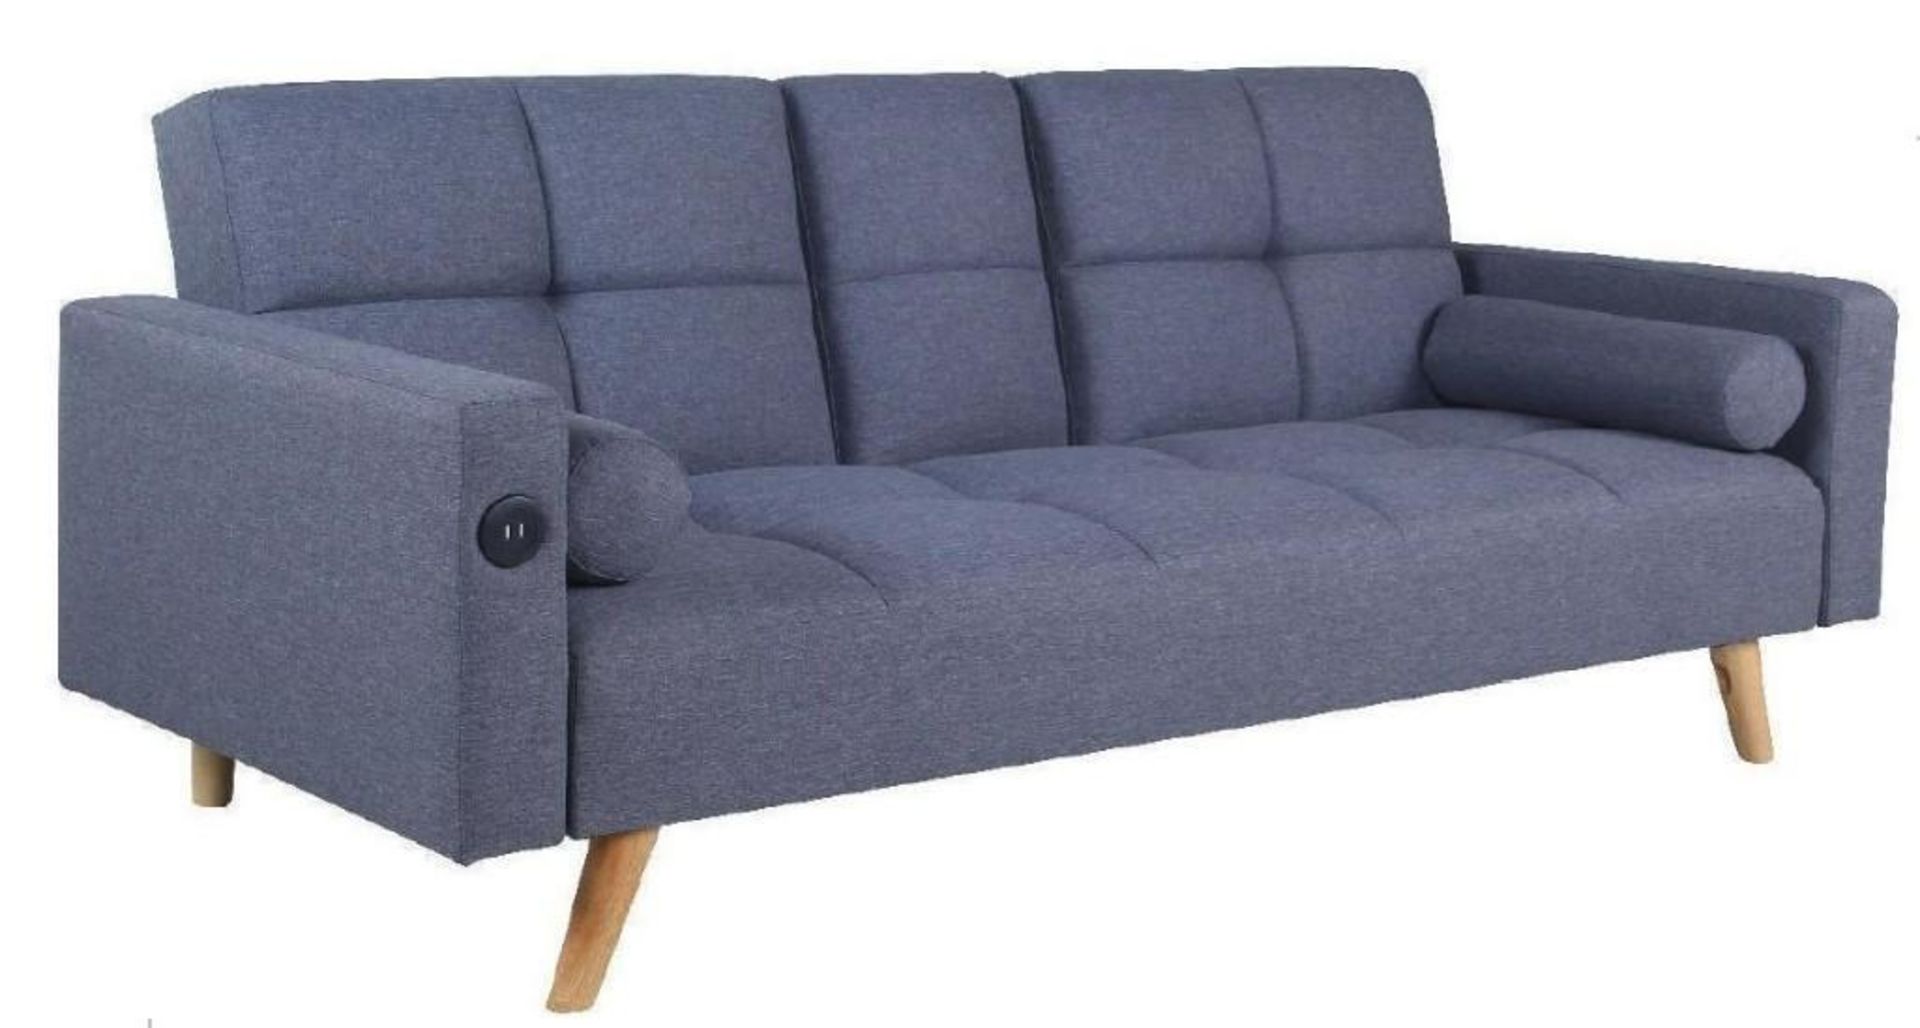 *BRAND NEW* Heavy Duty Clic Clac sofa bed with 2 bolsters, dual usb & charger socket. - Image 3 of 11